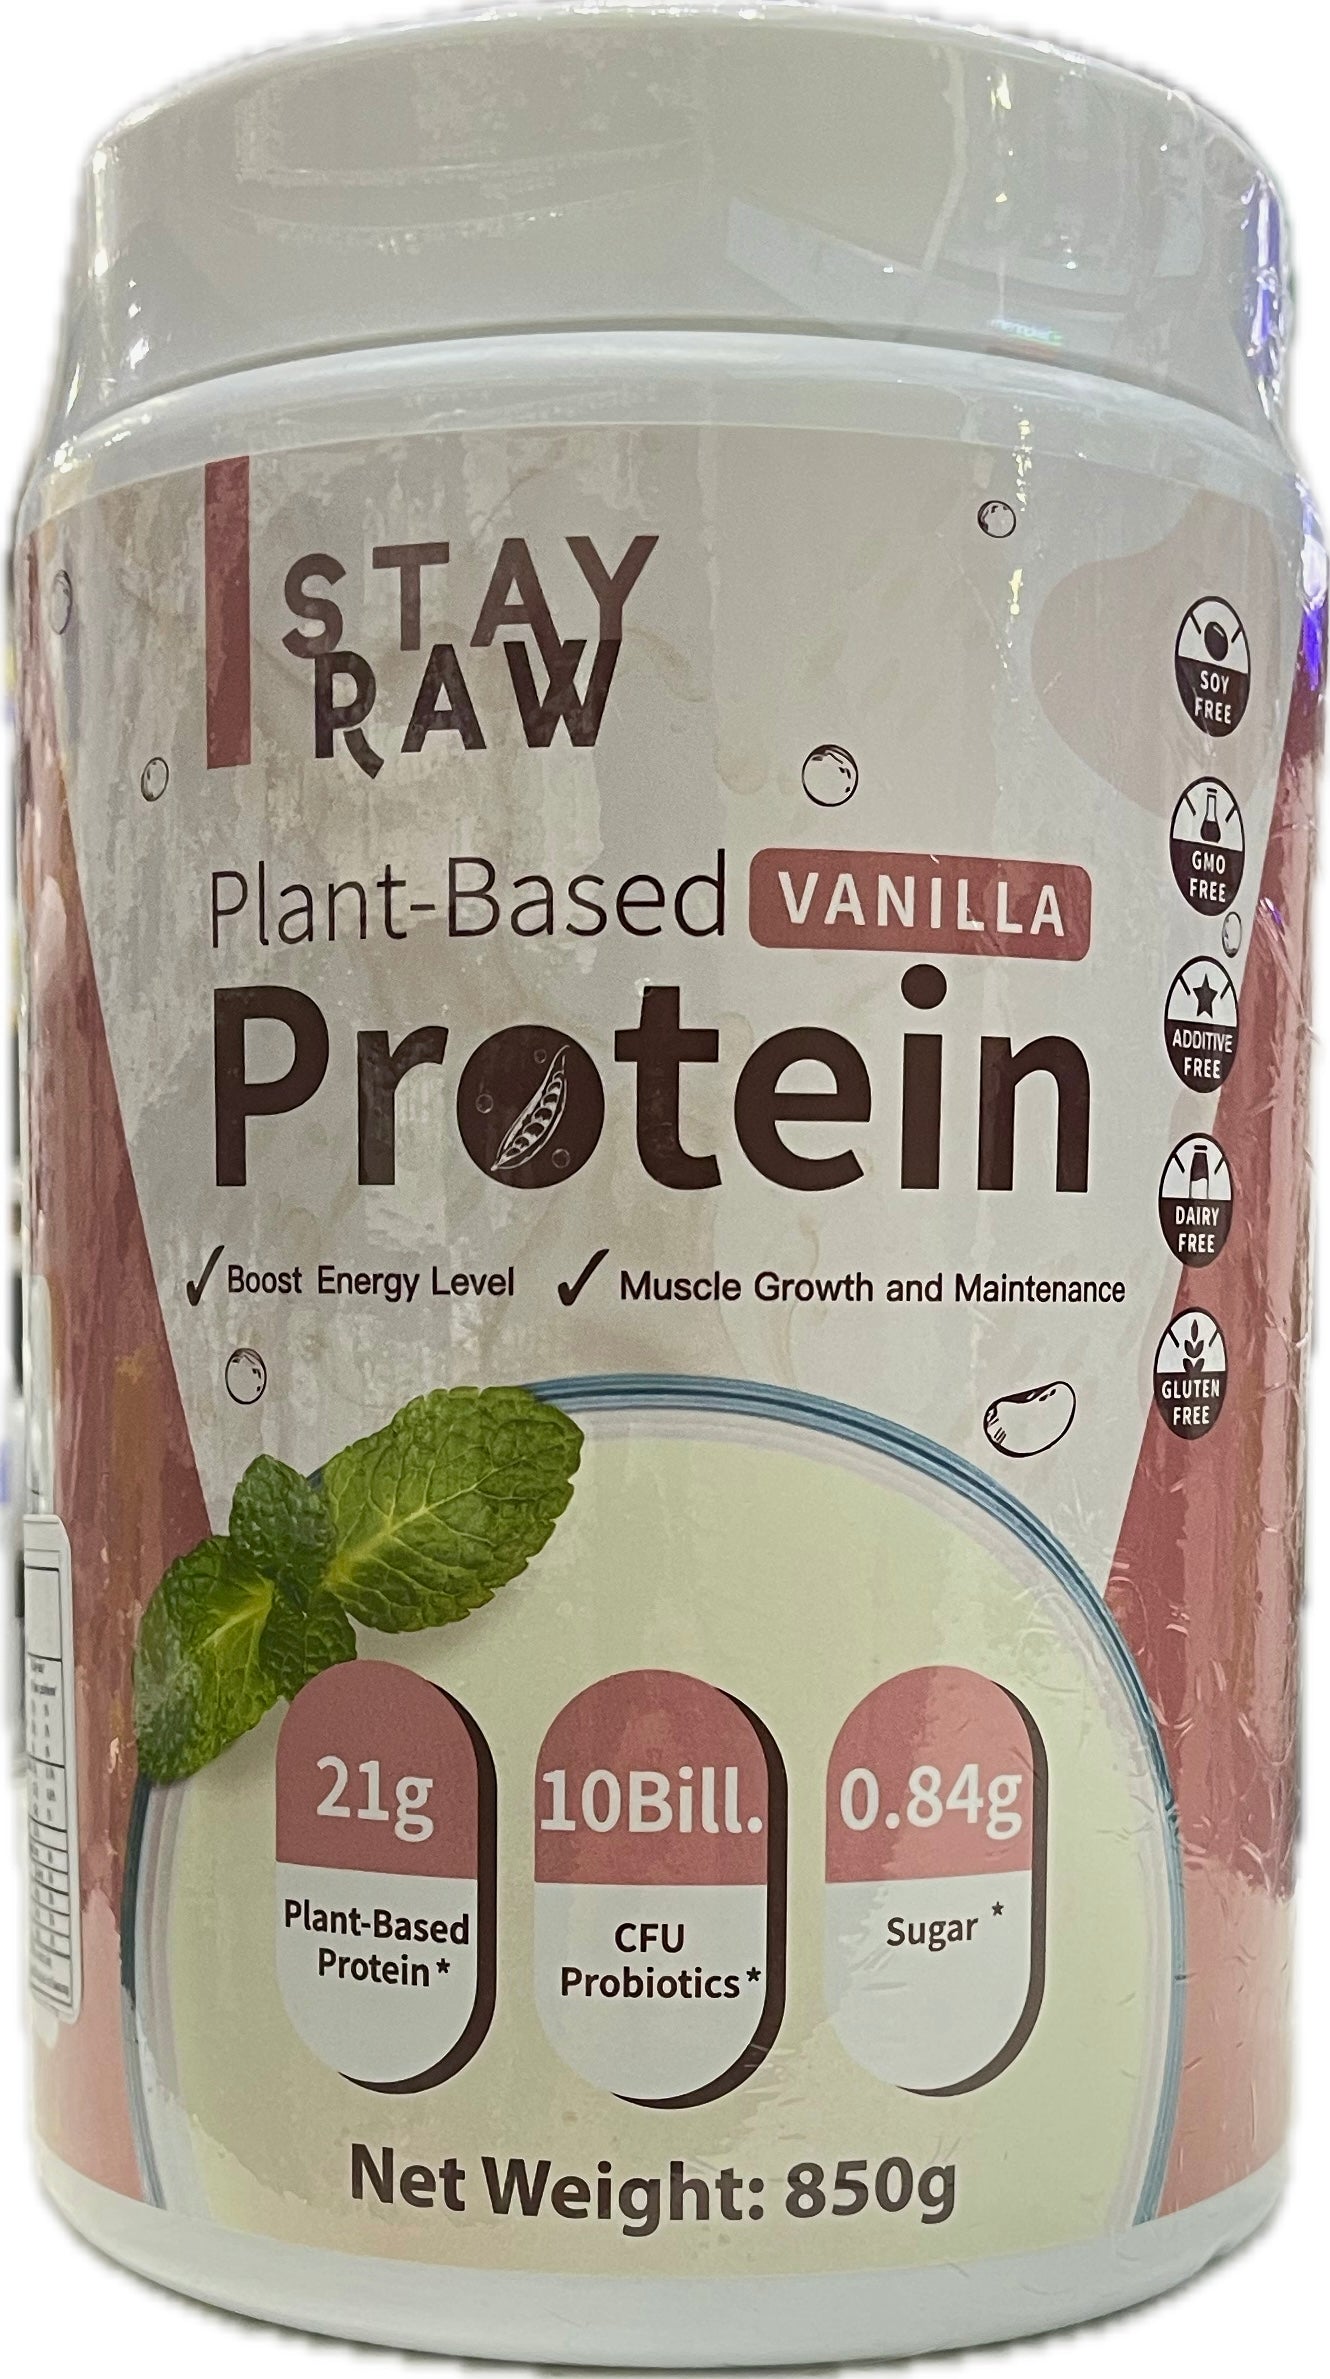 Stay Raw plant-based protein